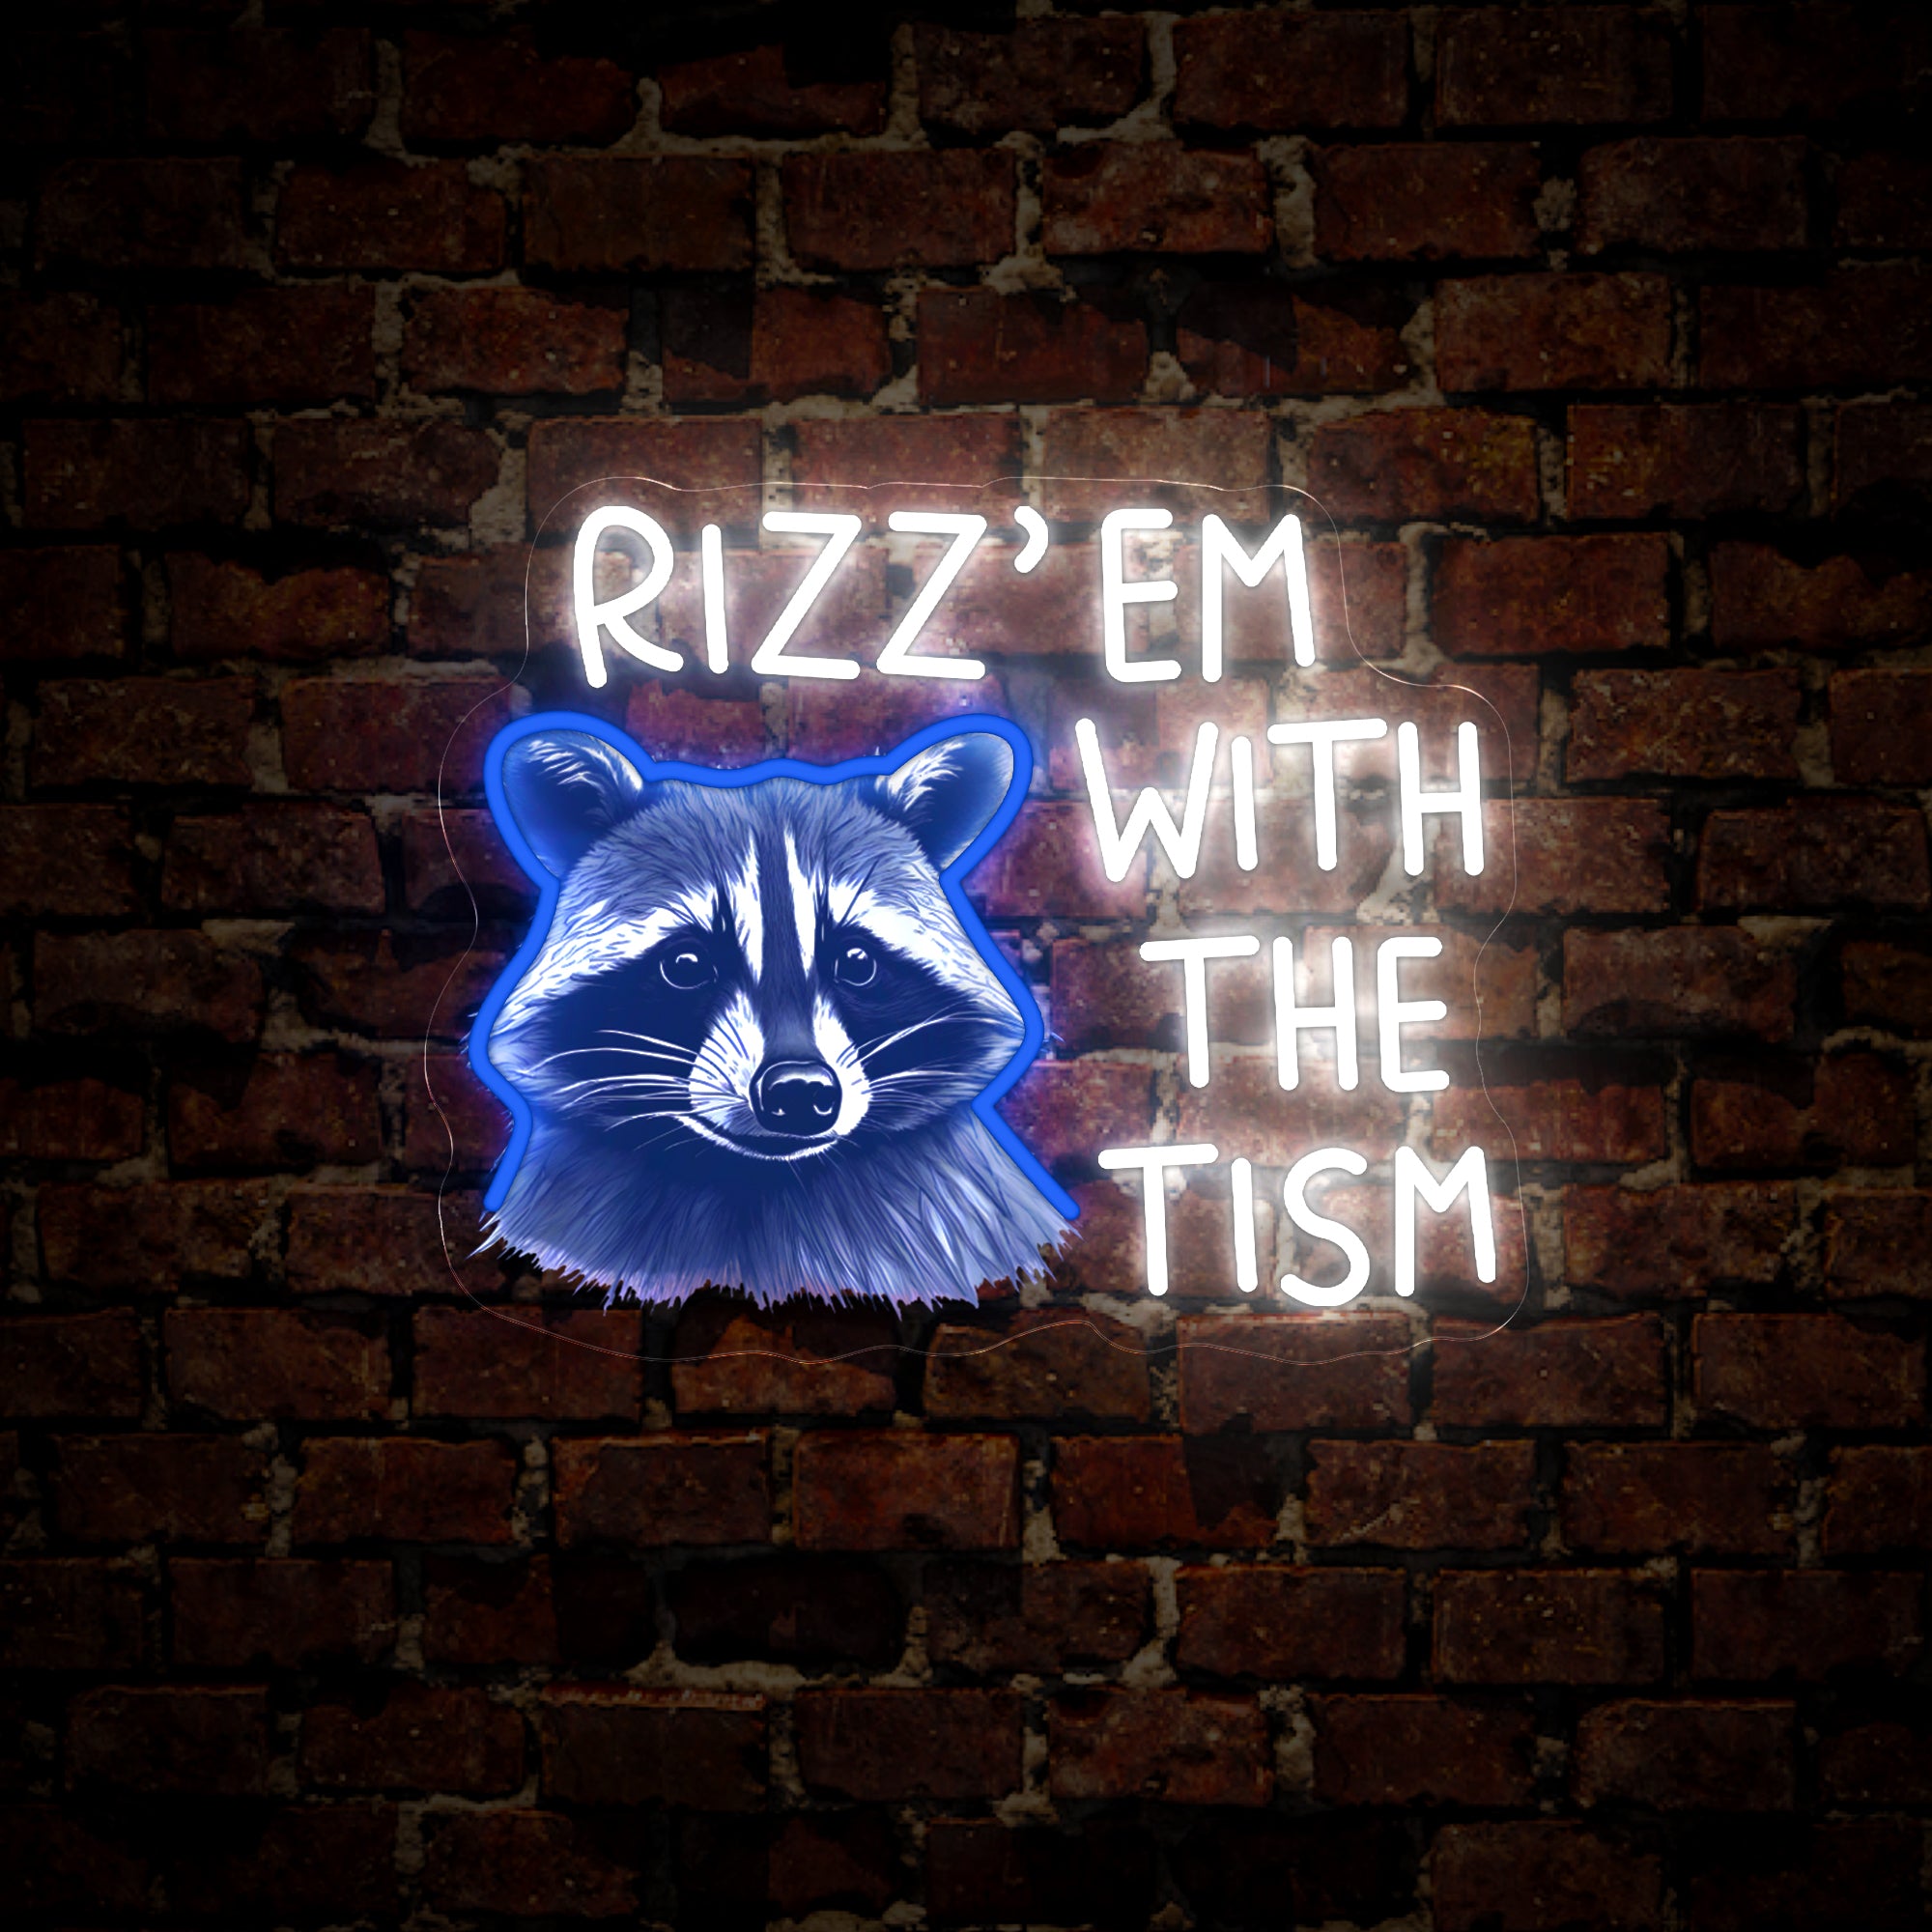 Rizz Em with The Tism Artwork Neon Sign